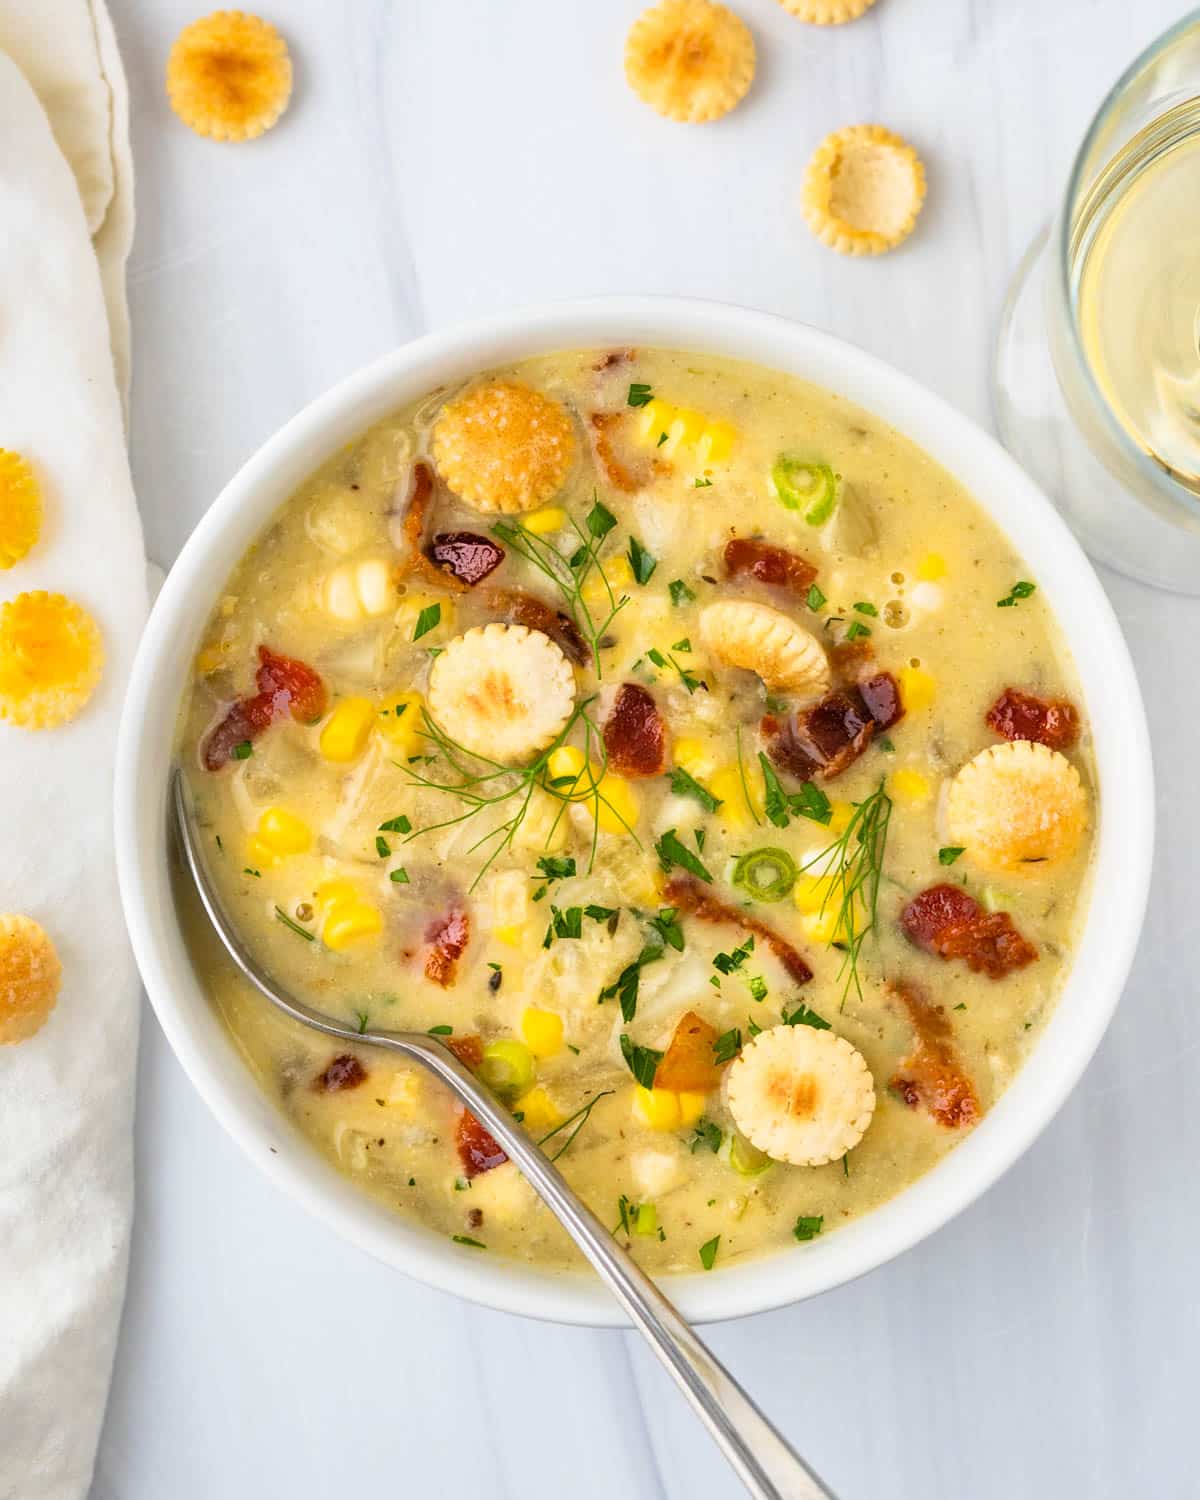 Corn and potato chowder with bacon in a white bowl.